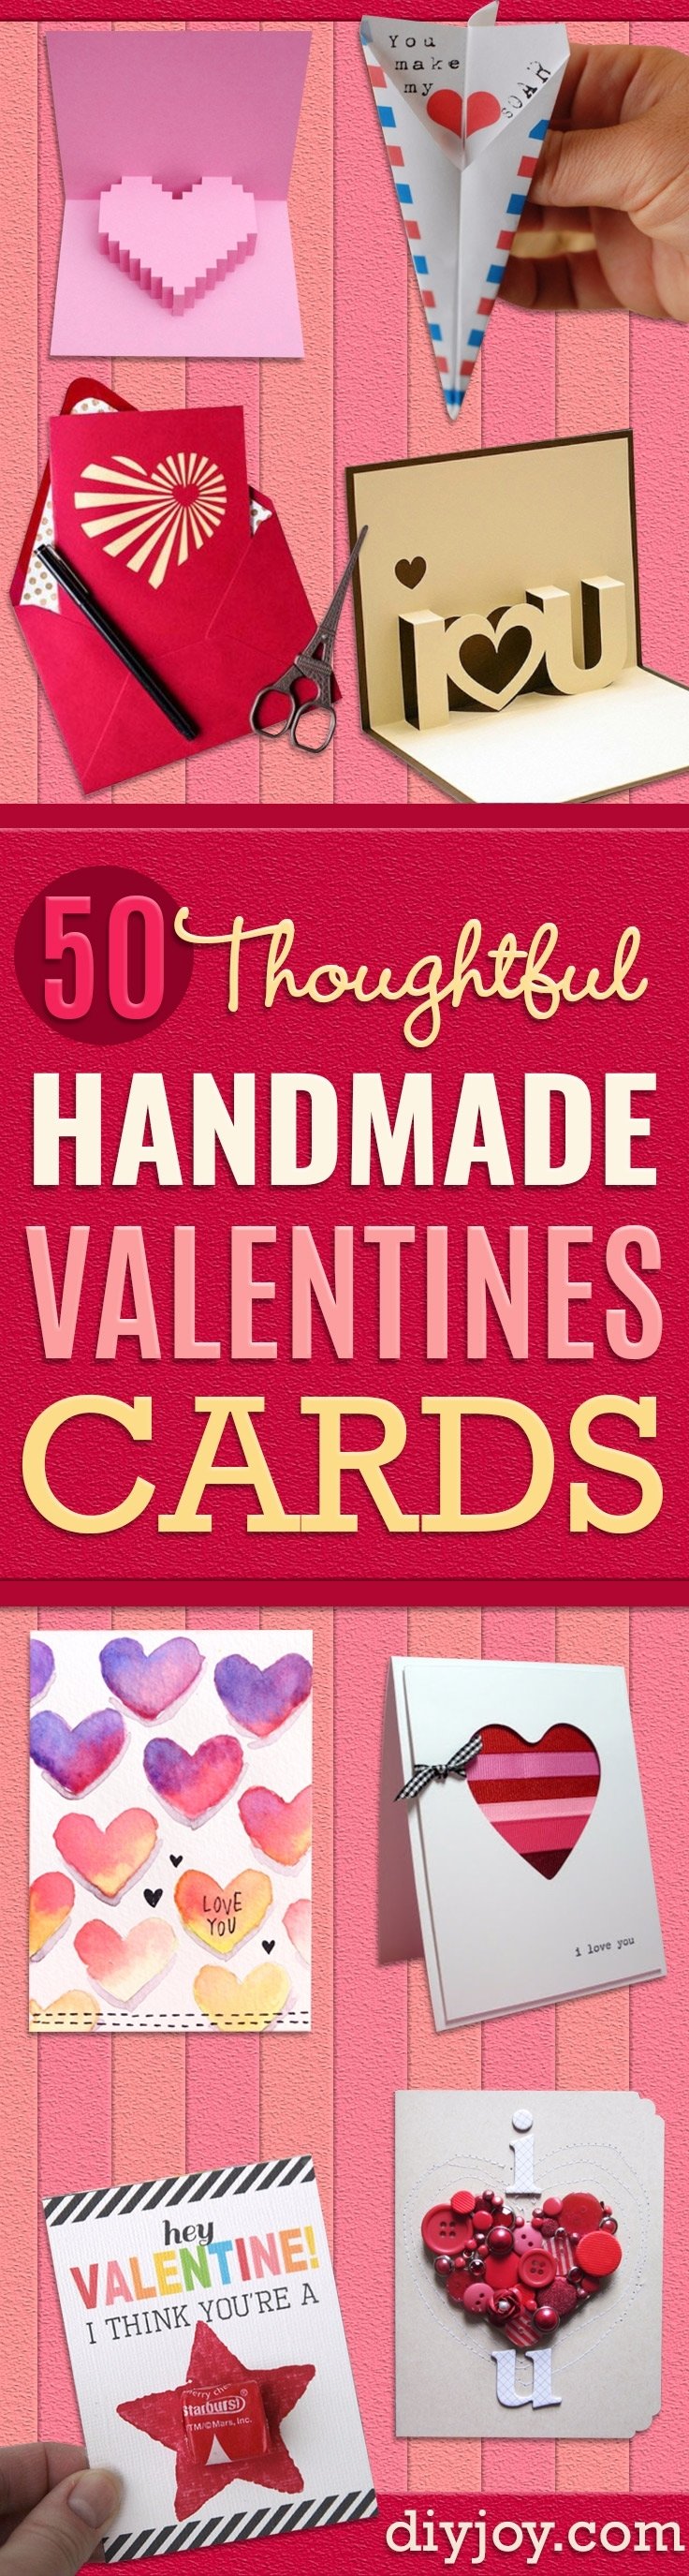 10 Lovable Homemade Valentines Ideas For Him 50 thoughtful handmade valentines cards 2022